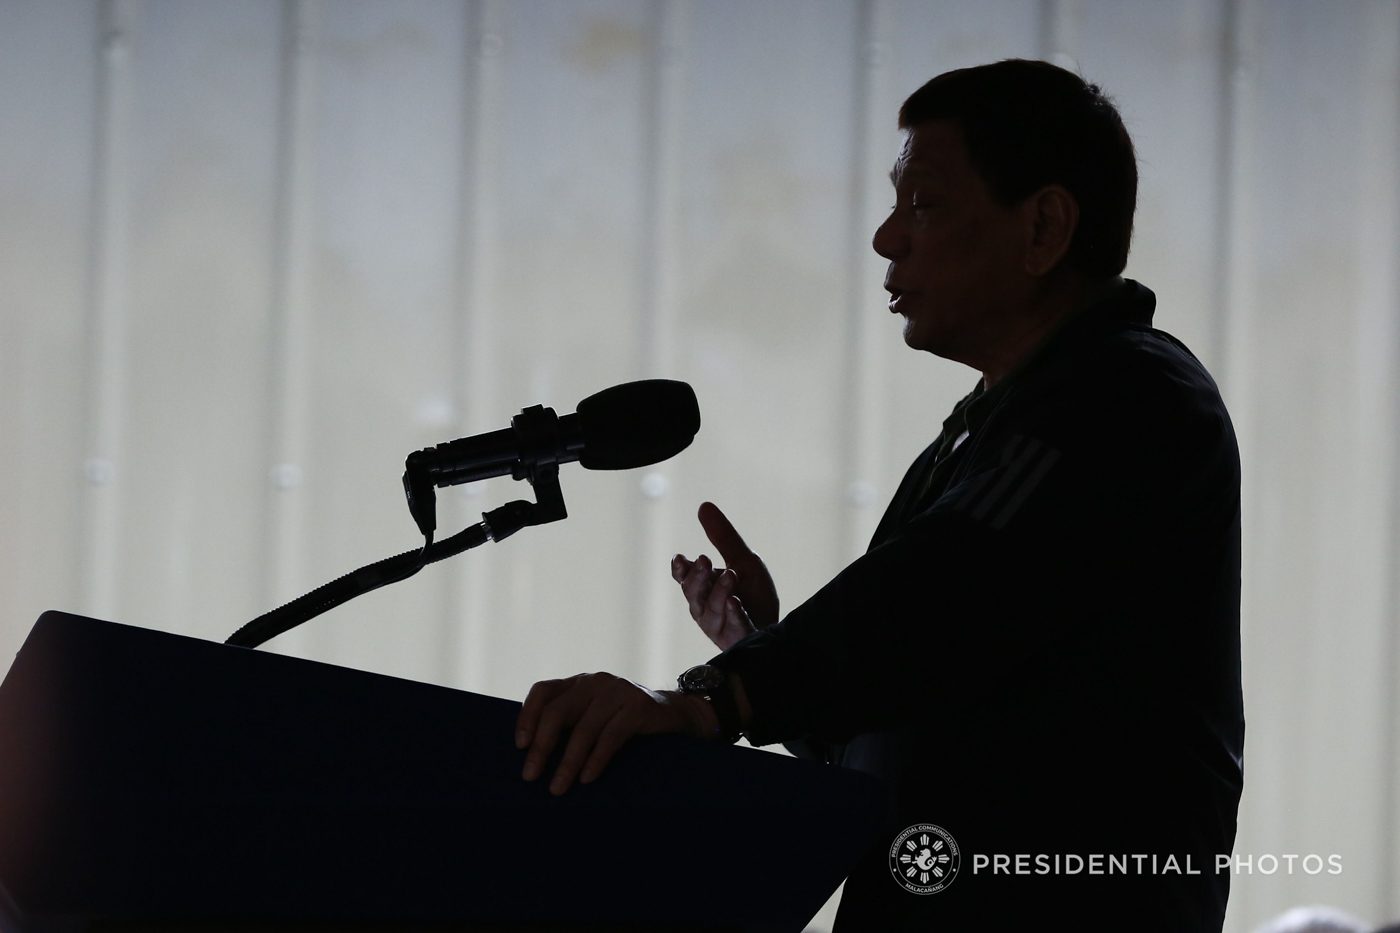 'THE PUNISHER.' President Rodrigo Duterte stands for the Filipino dream of 'swift justice.' Malacañang file photo 